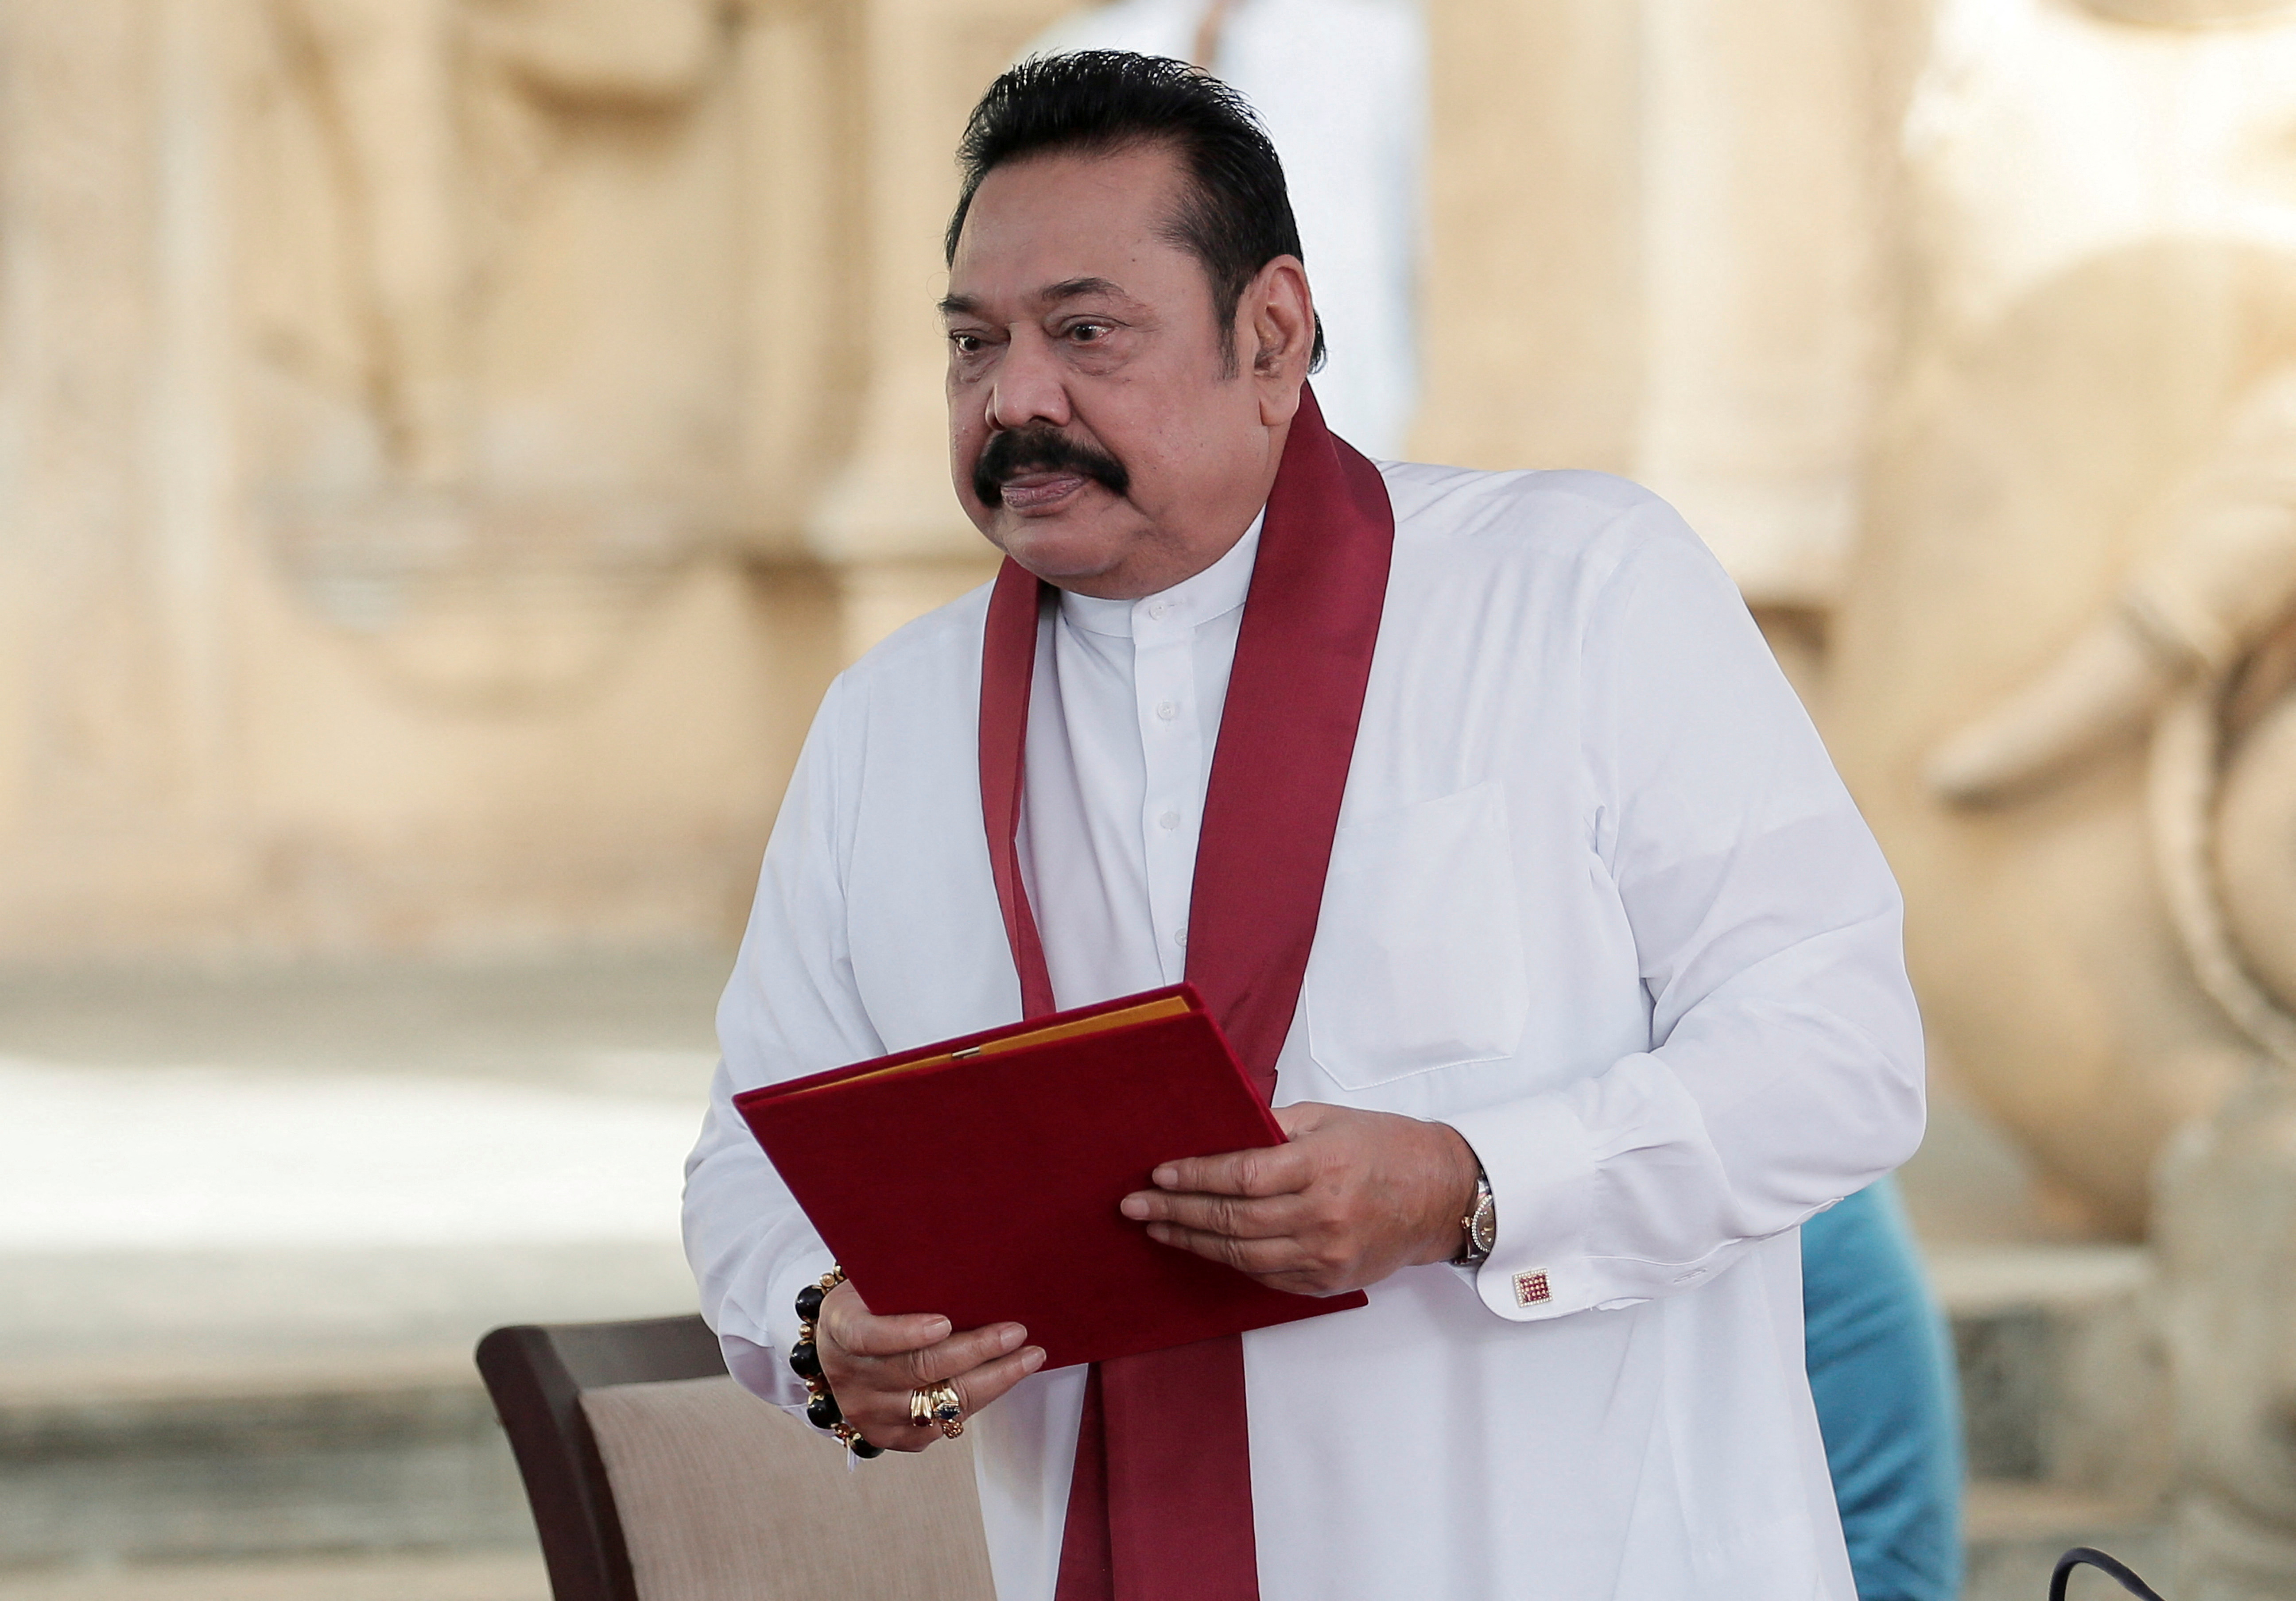 Sri Lanka's former leader Rajapaksa is seen after reading his oaths as the new Prime Minister in front of his brother and Sri Lanka's President Rajapaksa during the swearing in ceremony at Kelaniya Buddhist temple in Colombo